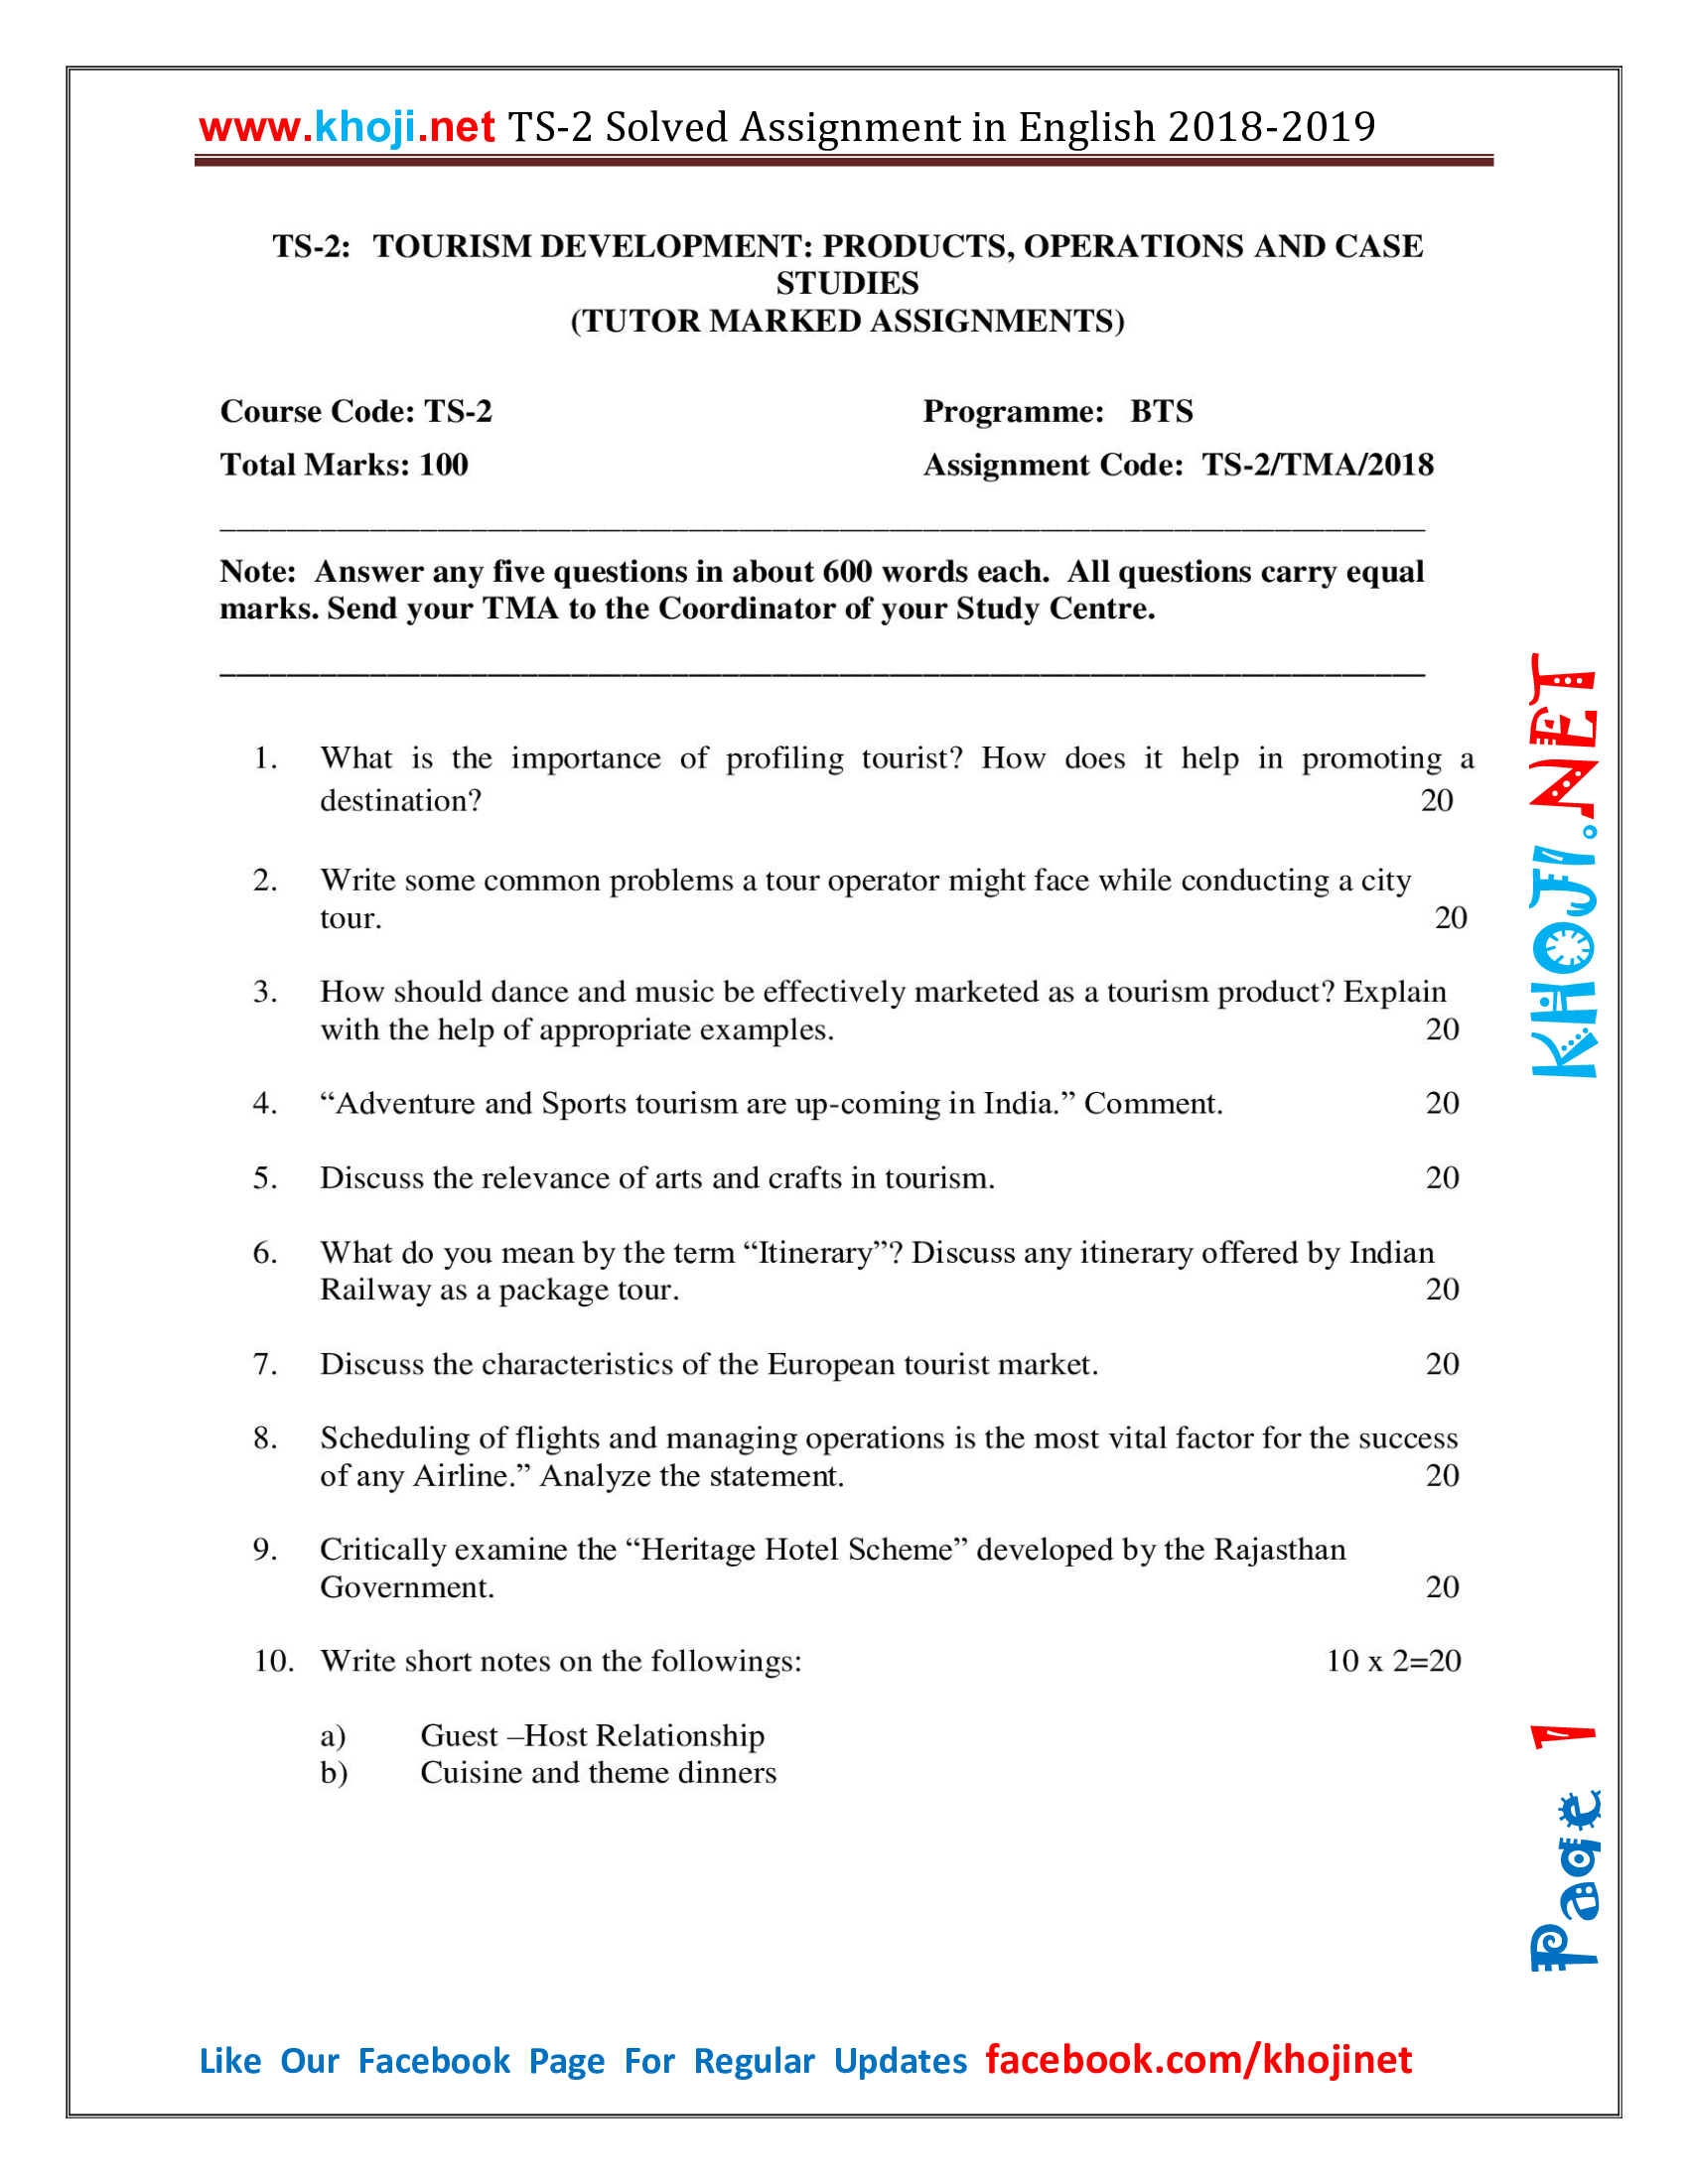 TS-2 Solved Assignment 2018-19 IGNOU BTS English Medium in PDF